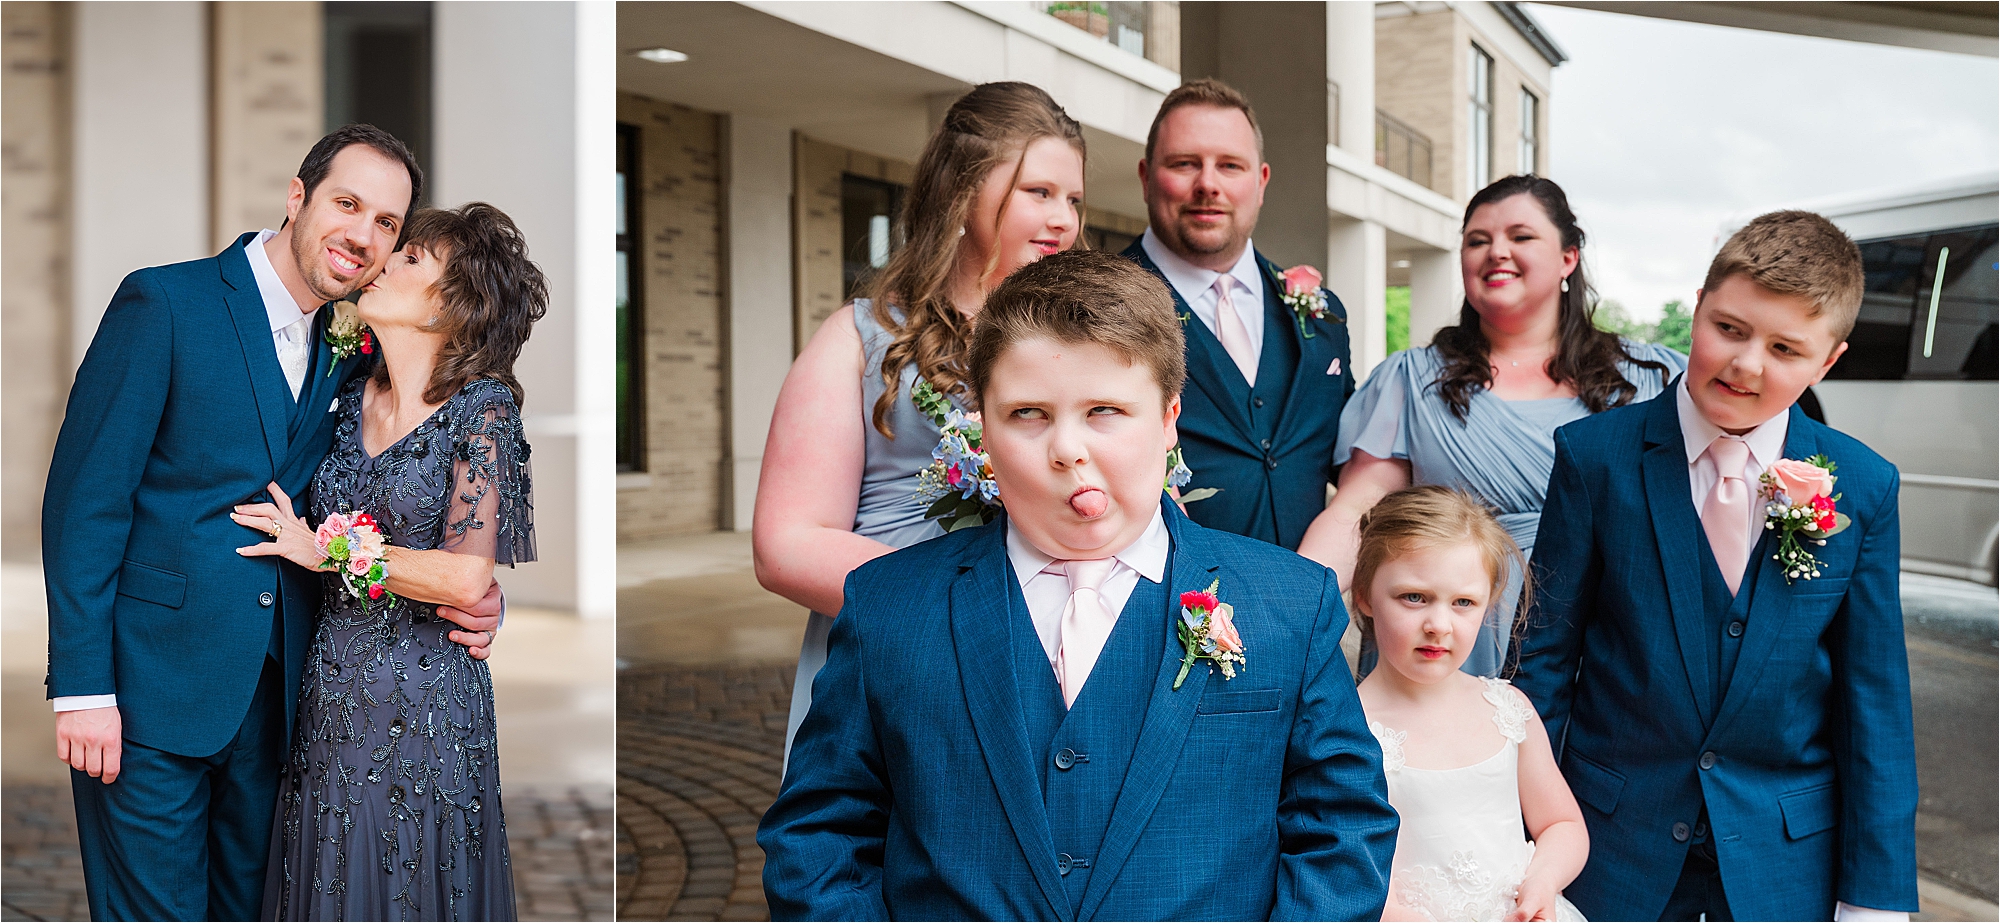 Kids being funny at family wedding in youngstown, ohio • Vineyards at Pine Lake Events Center Wedding in Columbiana, Ohio